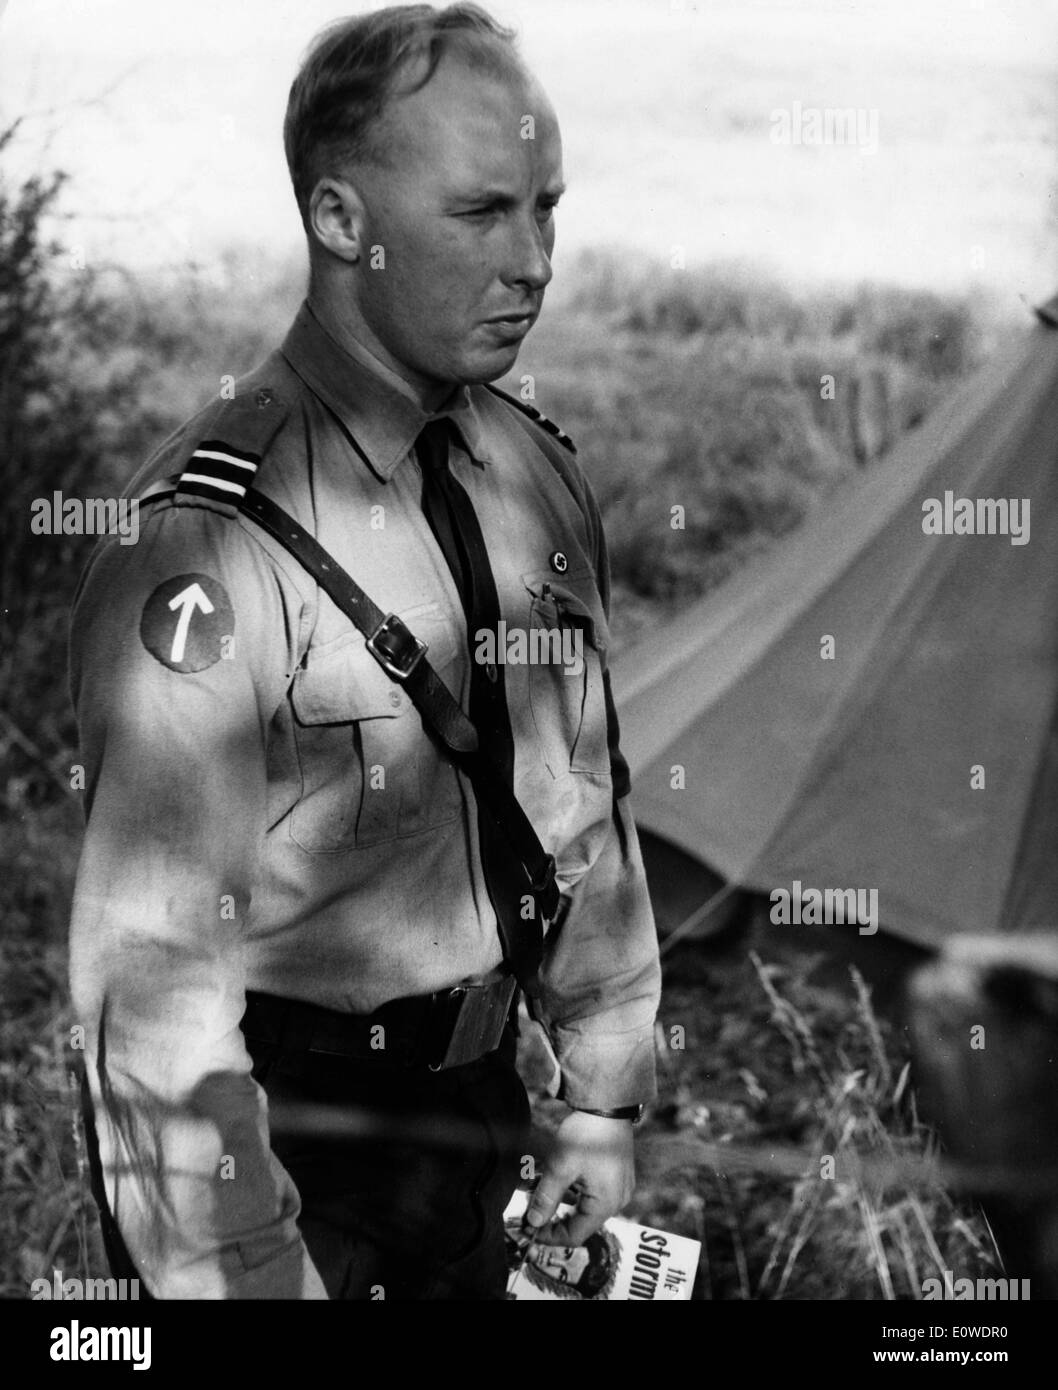 Soldier at Nazi camp Stock Photo